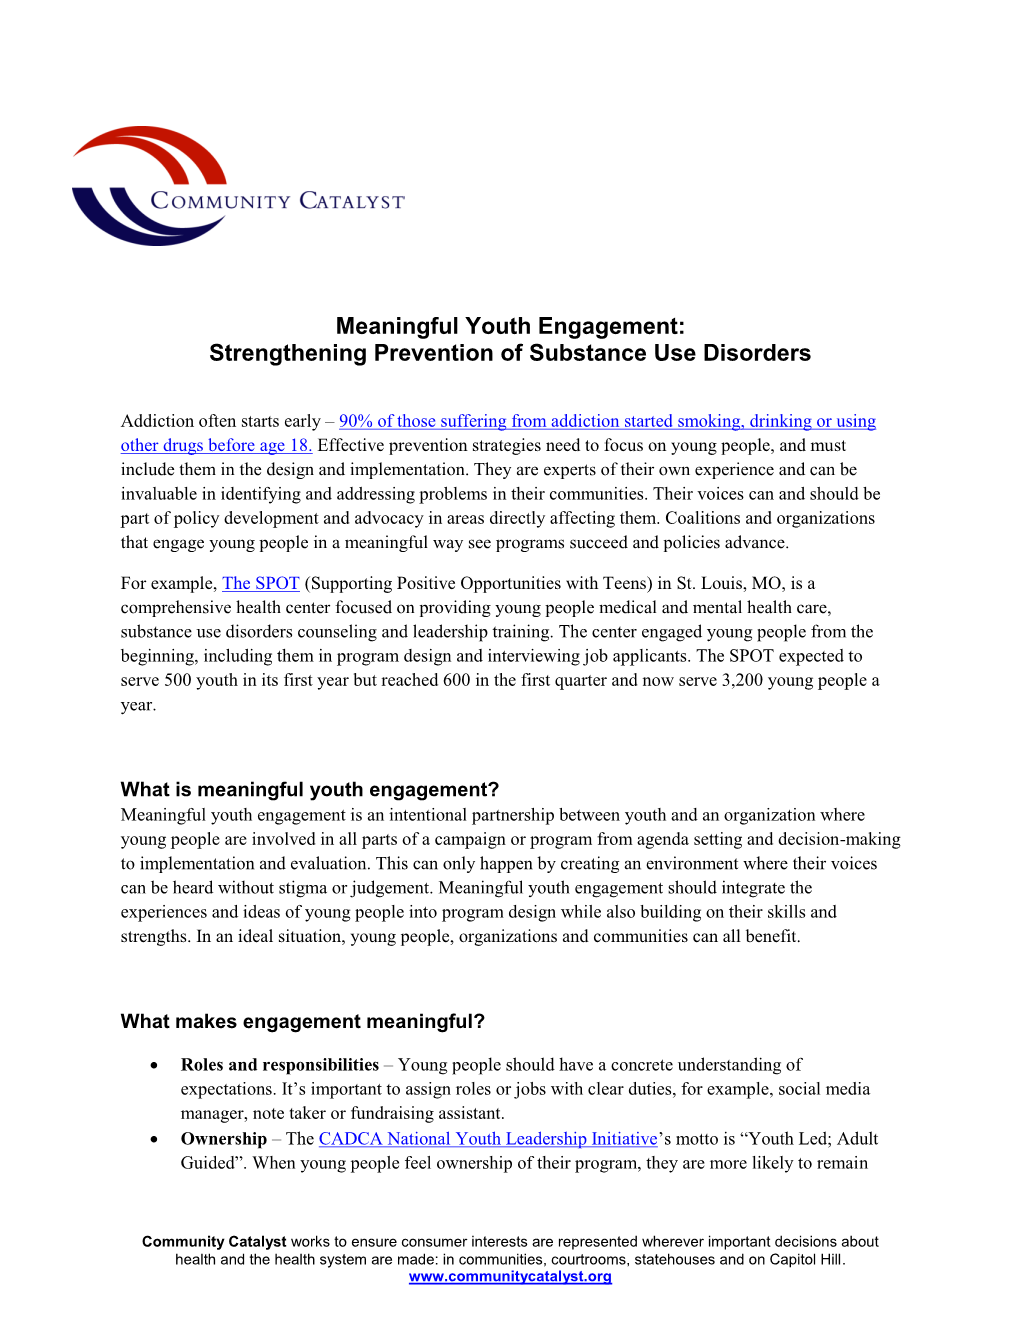 Meaningful Youth Engagement: Strengthening Prevention of Substance Use Disorders